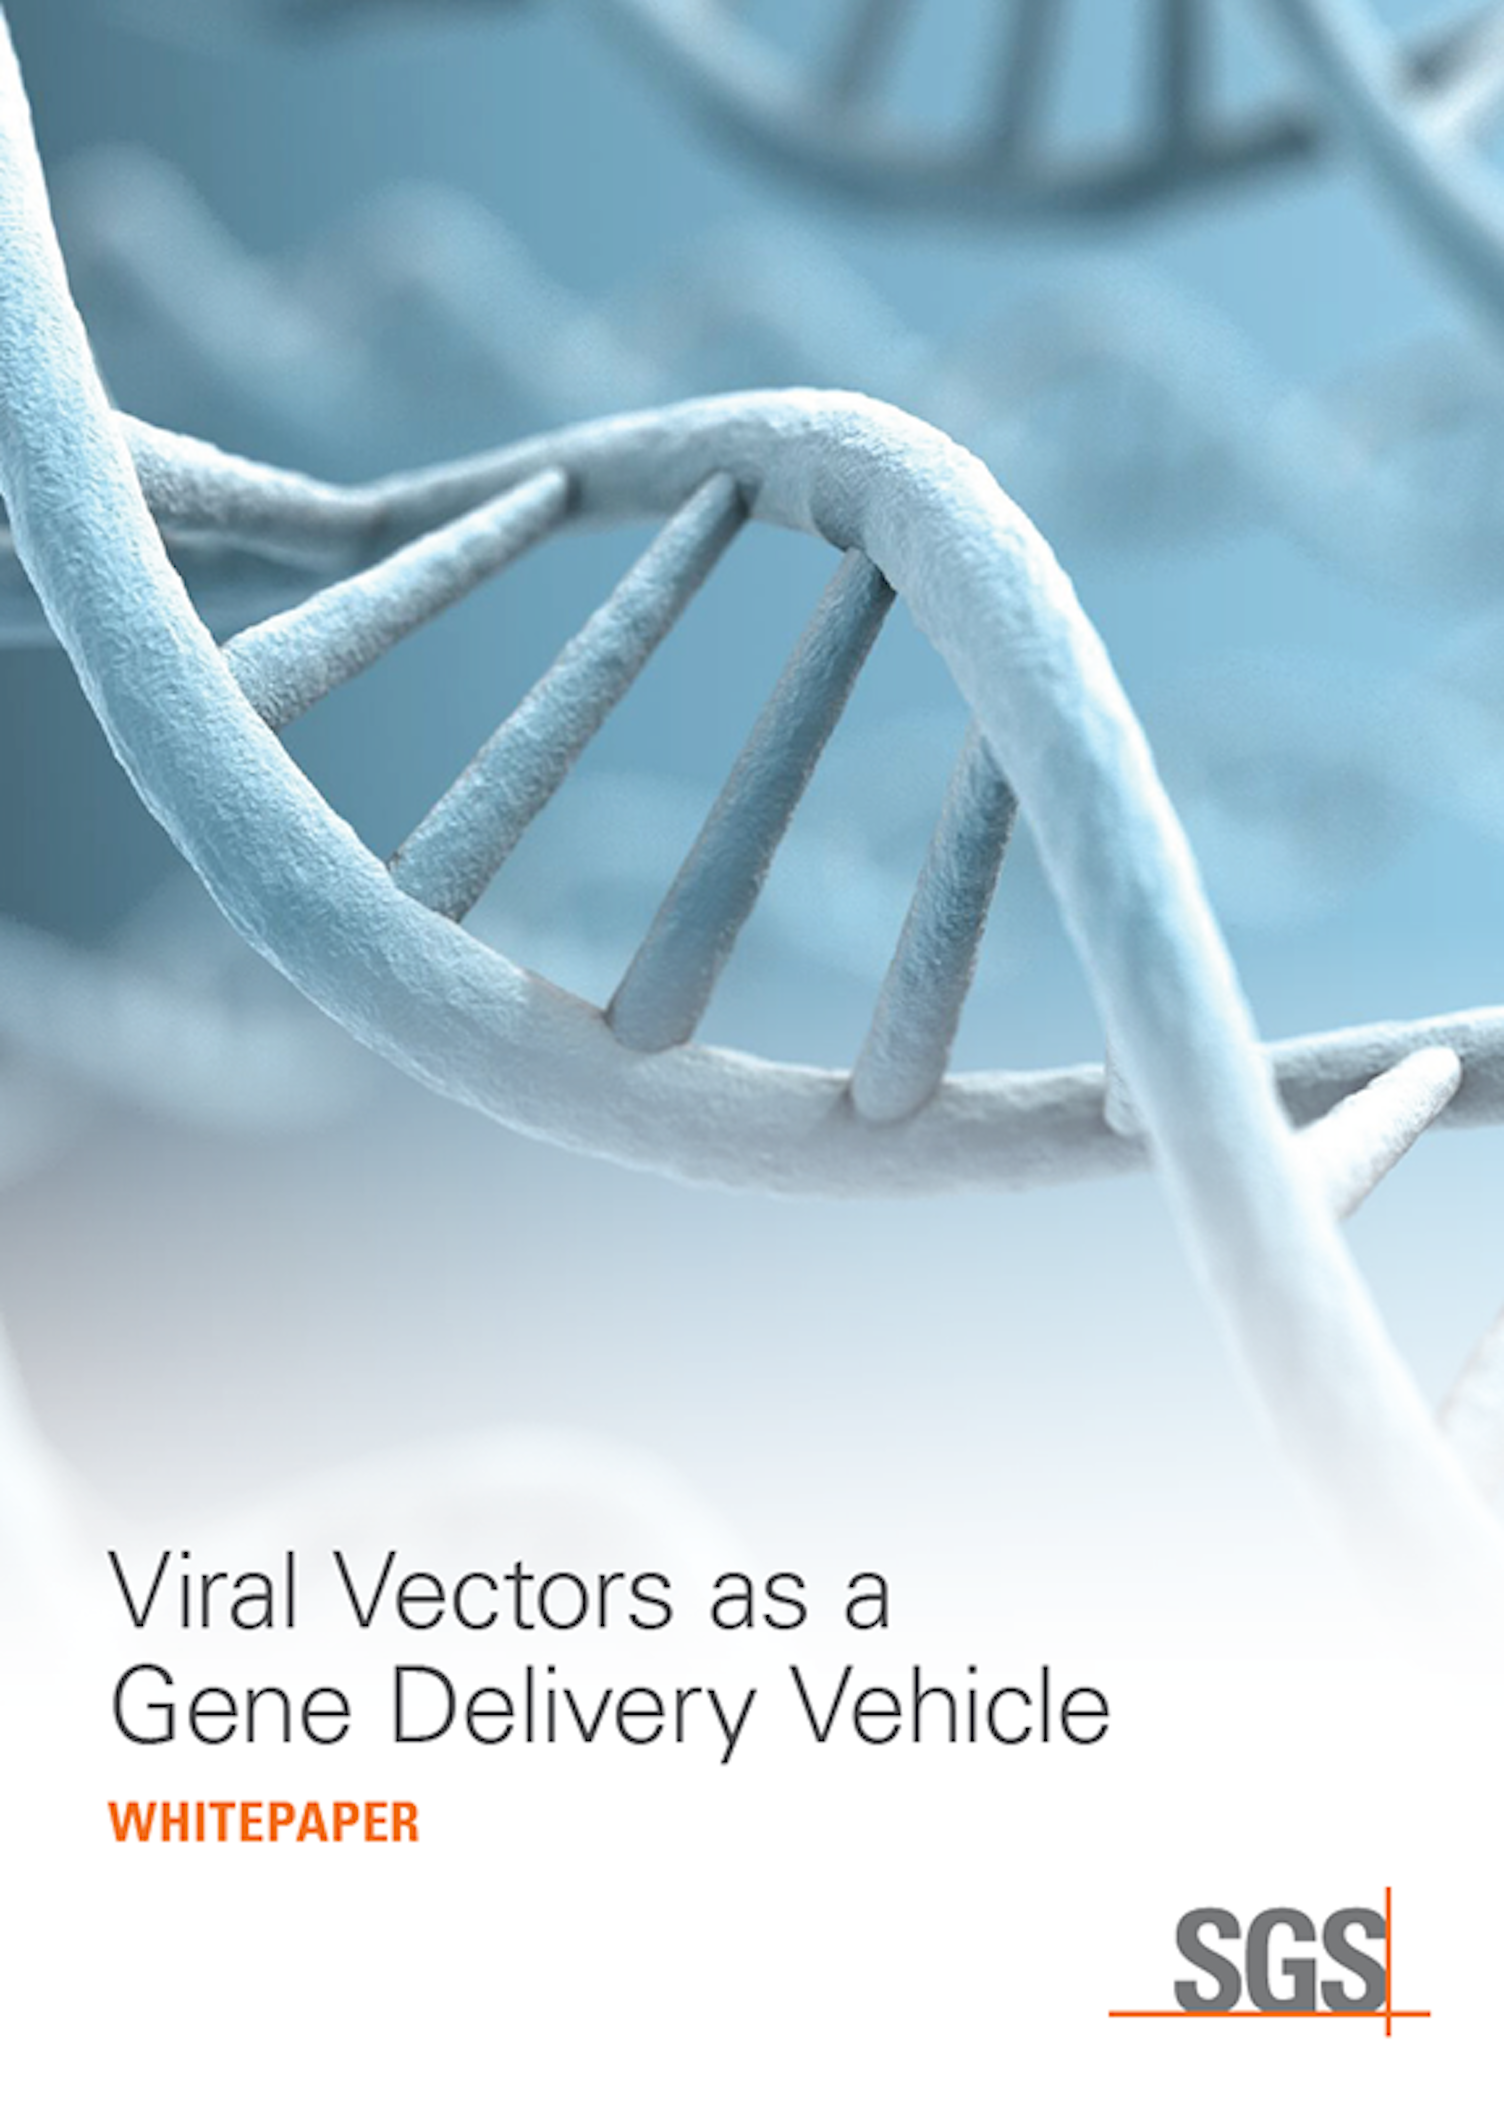 Viral Vectors as a Gene Delivery Vehicle